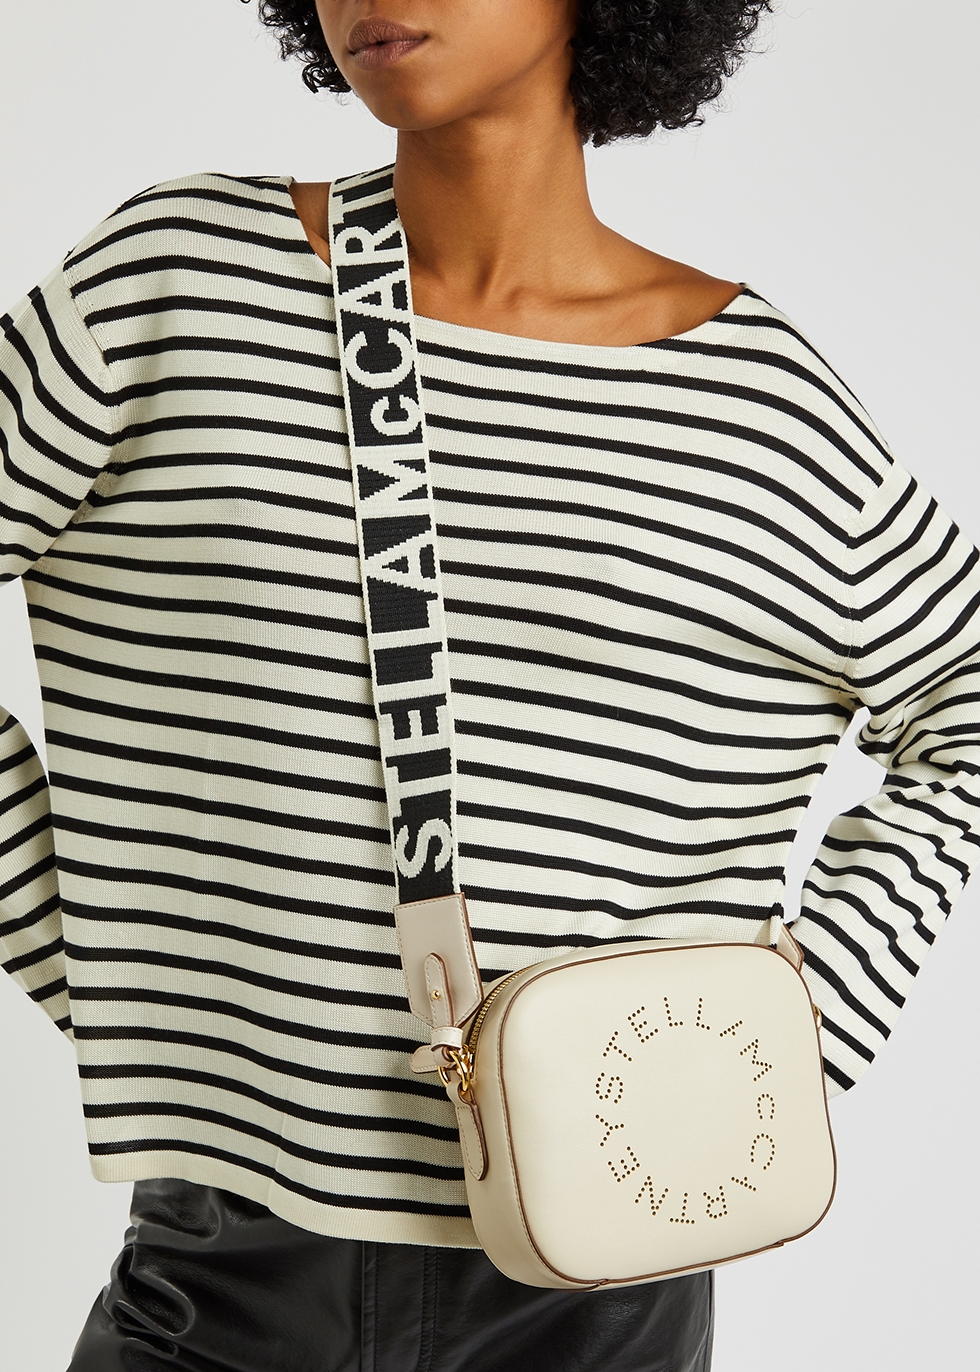 Top Crossbody Bags To Consider For Your Collection - PurseBop